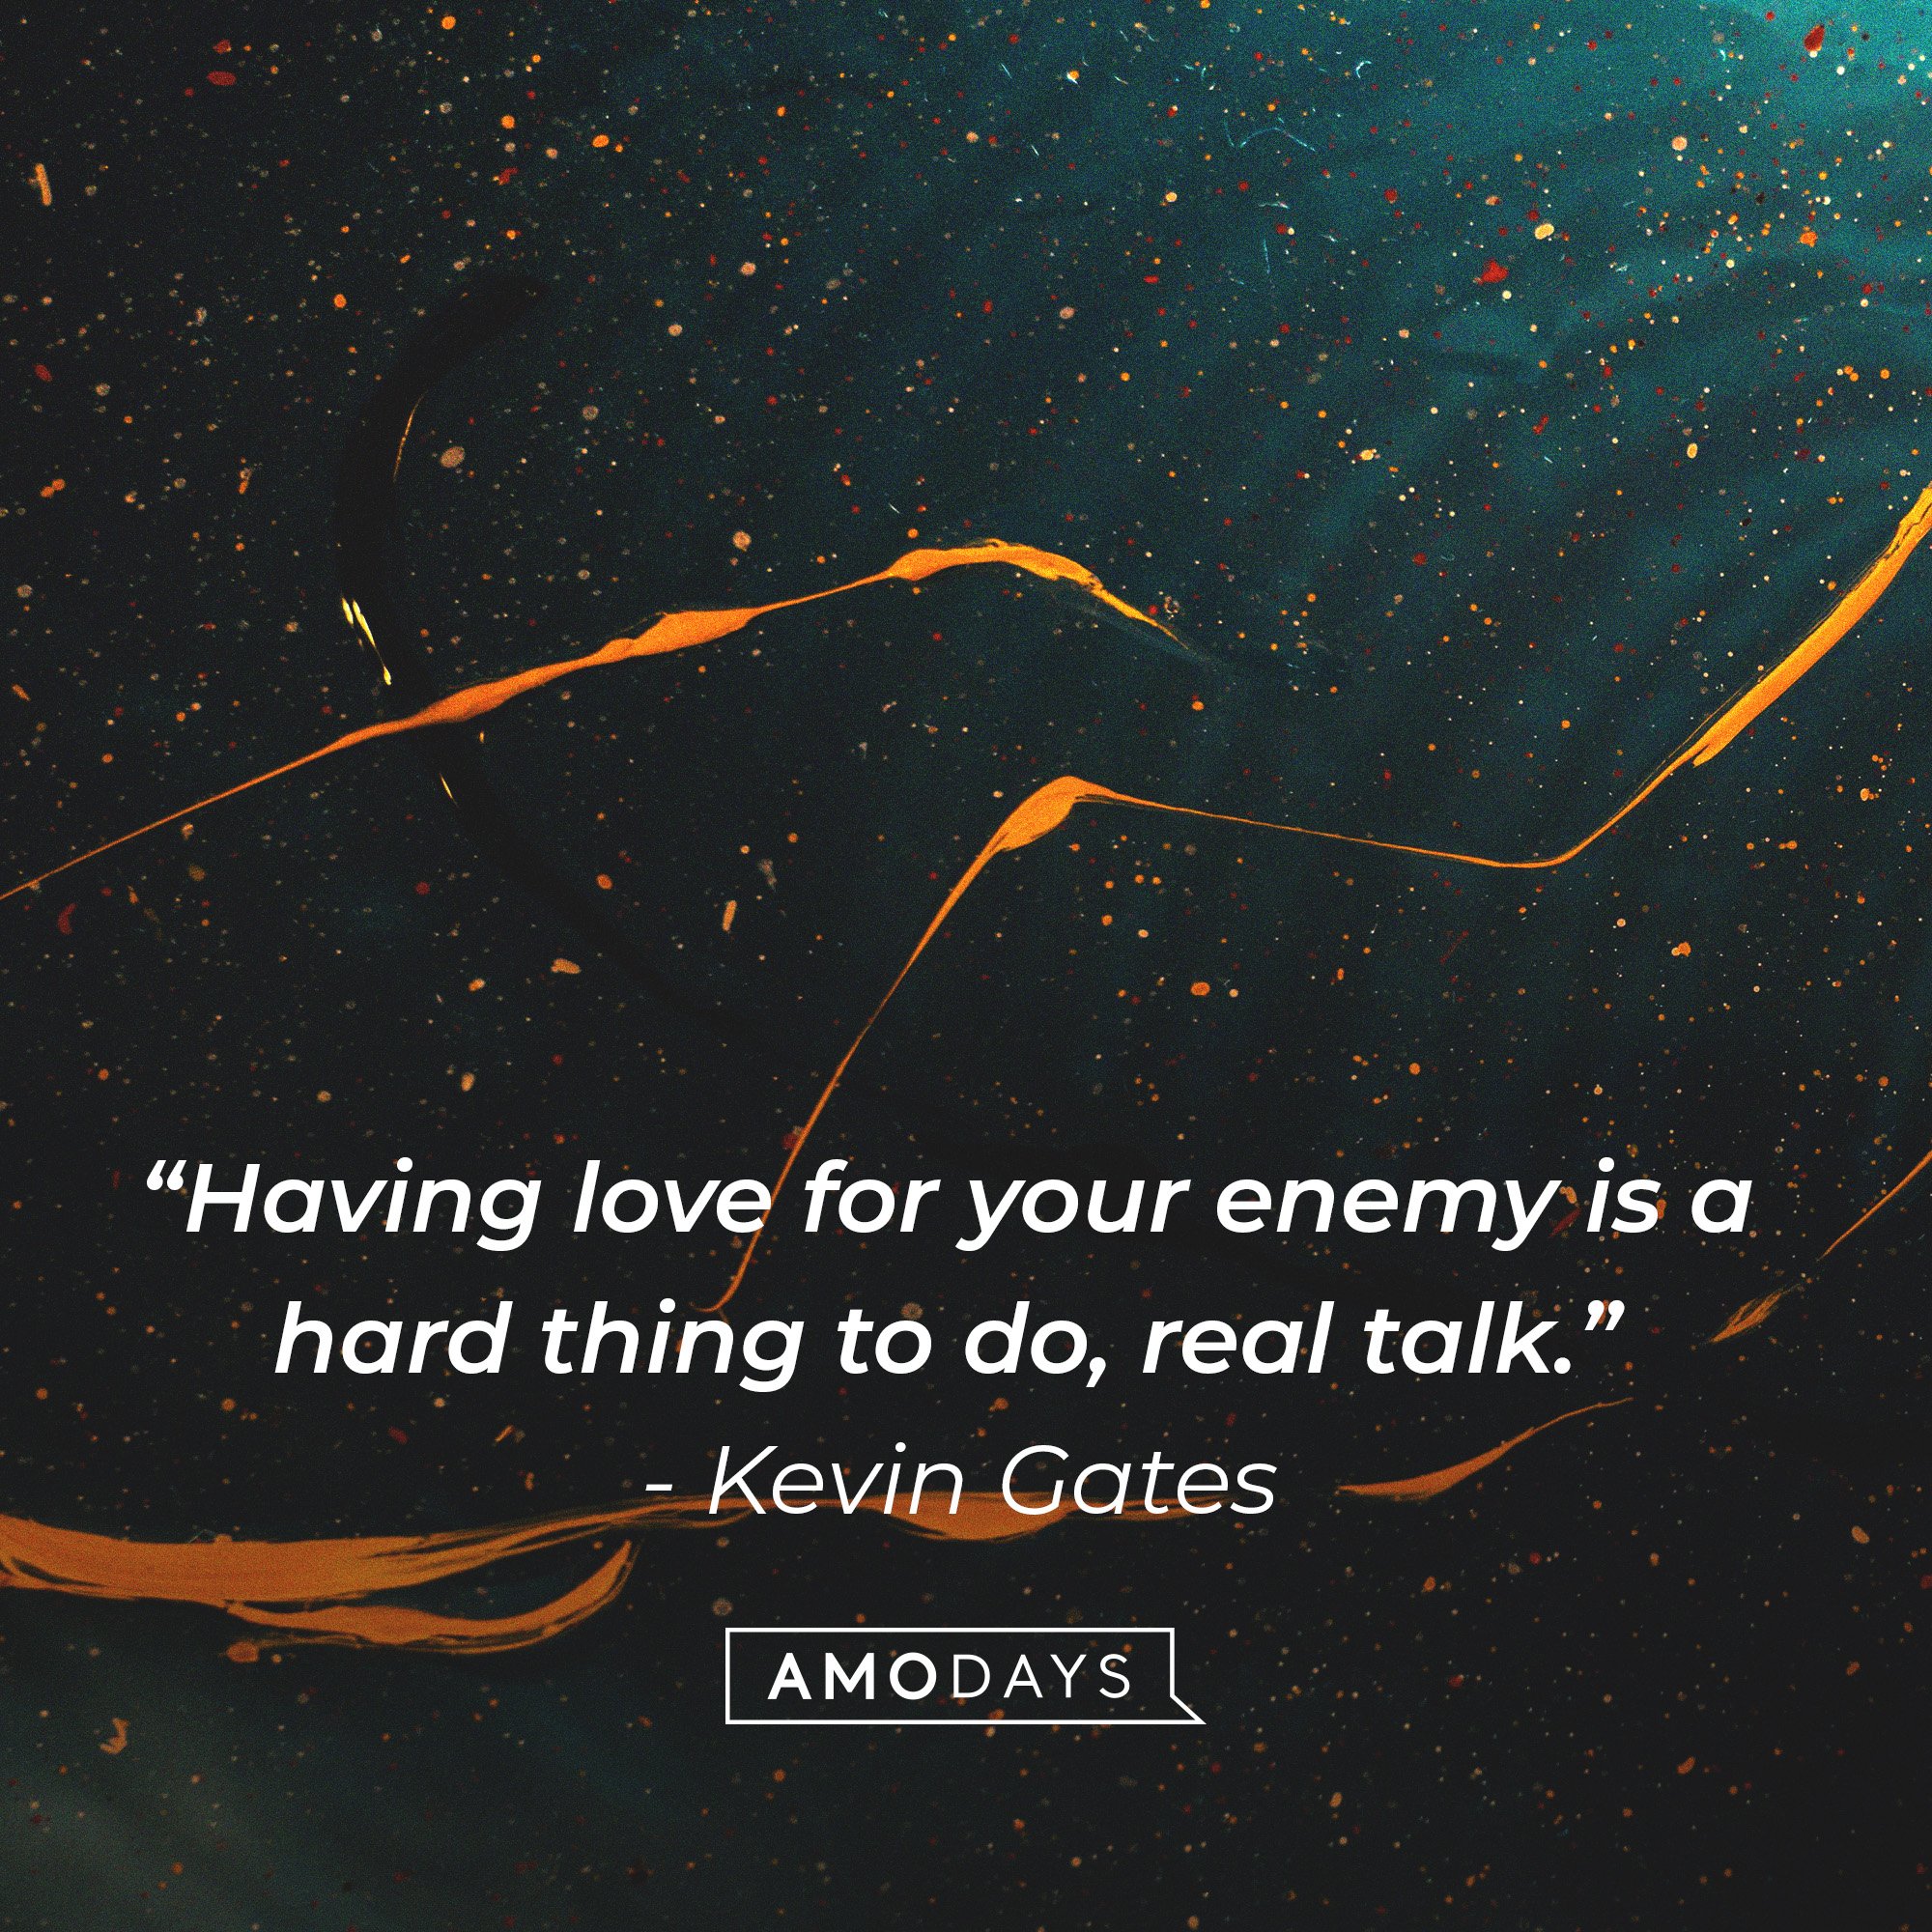 Kevin Gates’ quote: “Having love for your enemy is a hard thing to do, real talk.” | Image: AmoDays